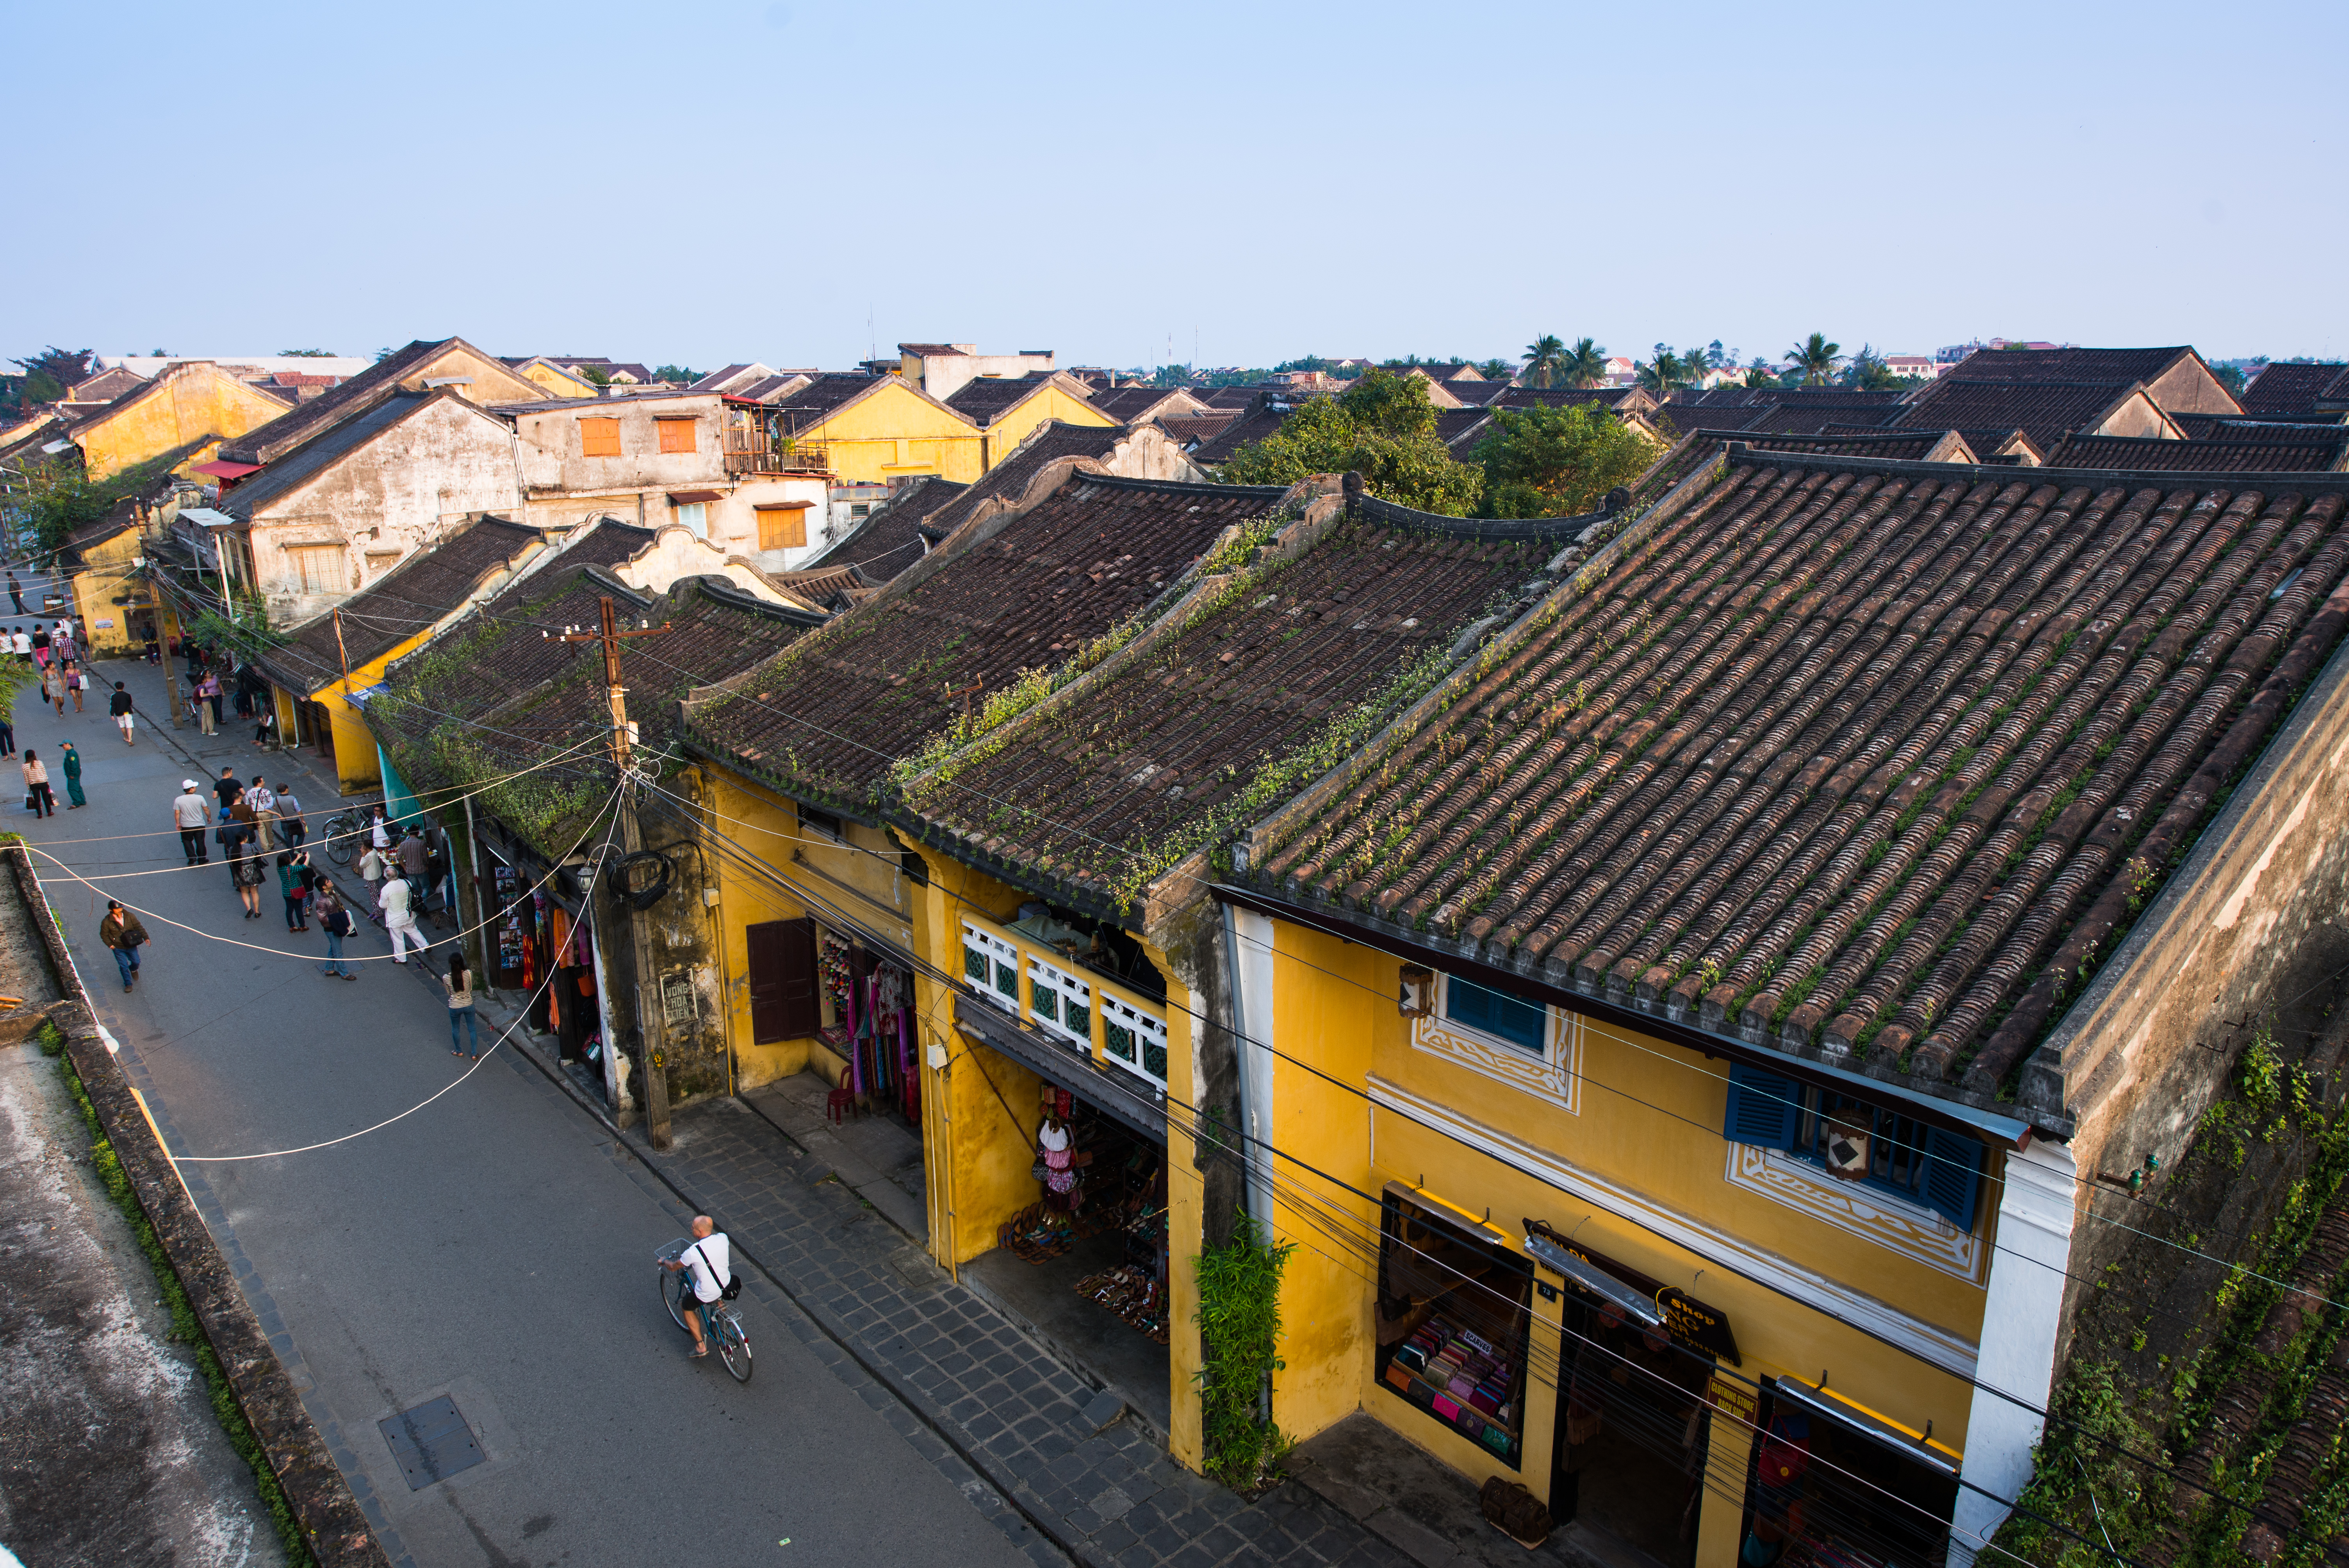 Peaceful Hoi An ancient town from high view